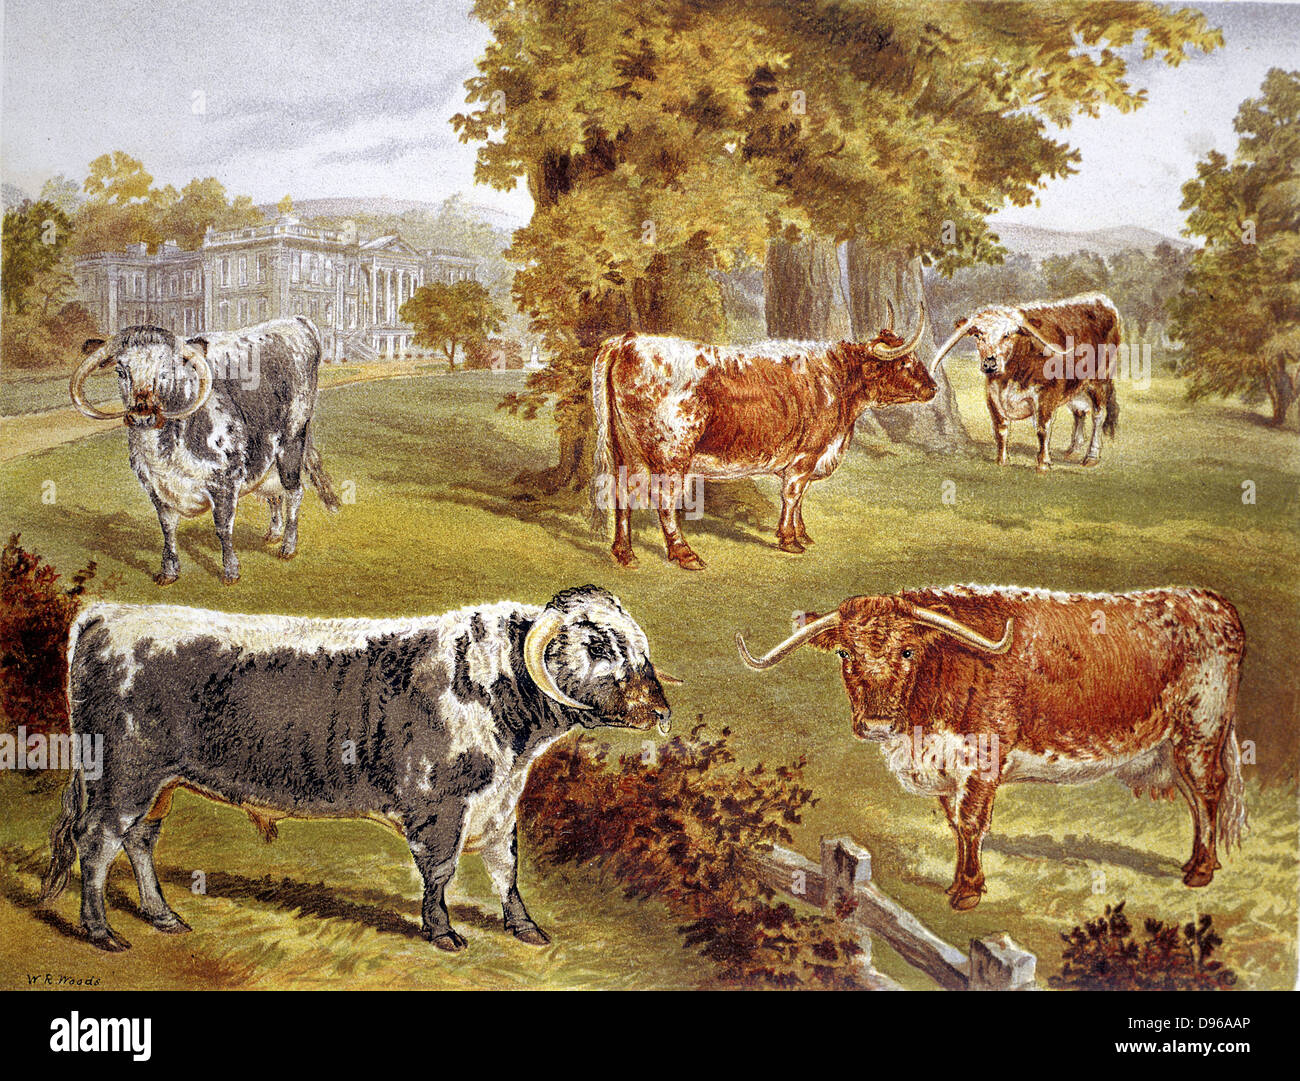 Longhorn cattle owned by Sir John Harpur-Crewe, Calke Abbey. Robert Bakewell (1725-1795) of Dishley, Leicestershire, improved the breed. Dual purpose, beef and dairy. Chromolithograph  1885. Stock Photo